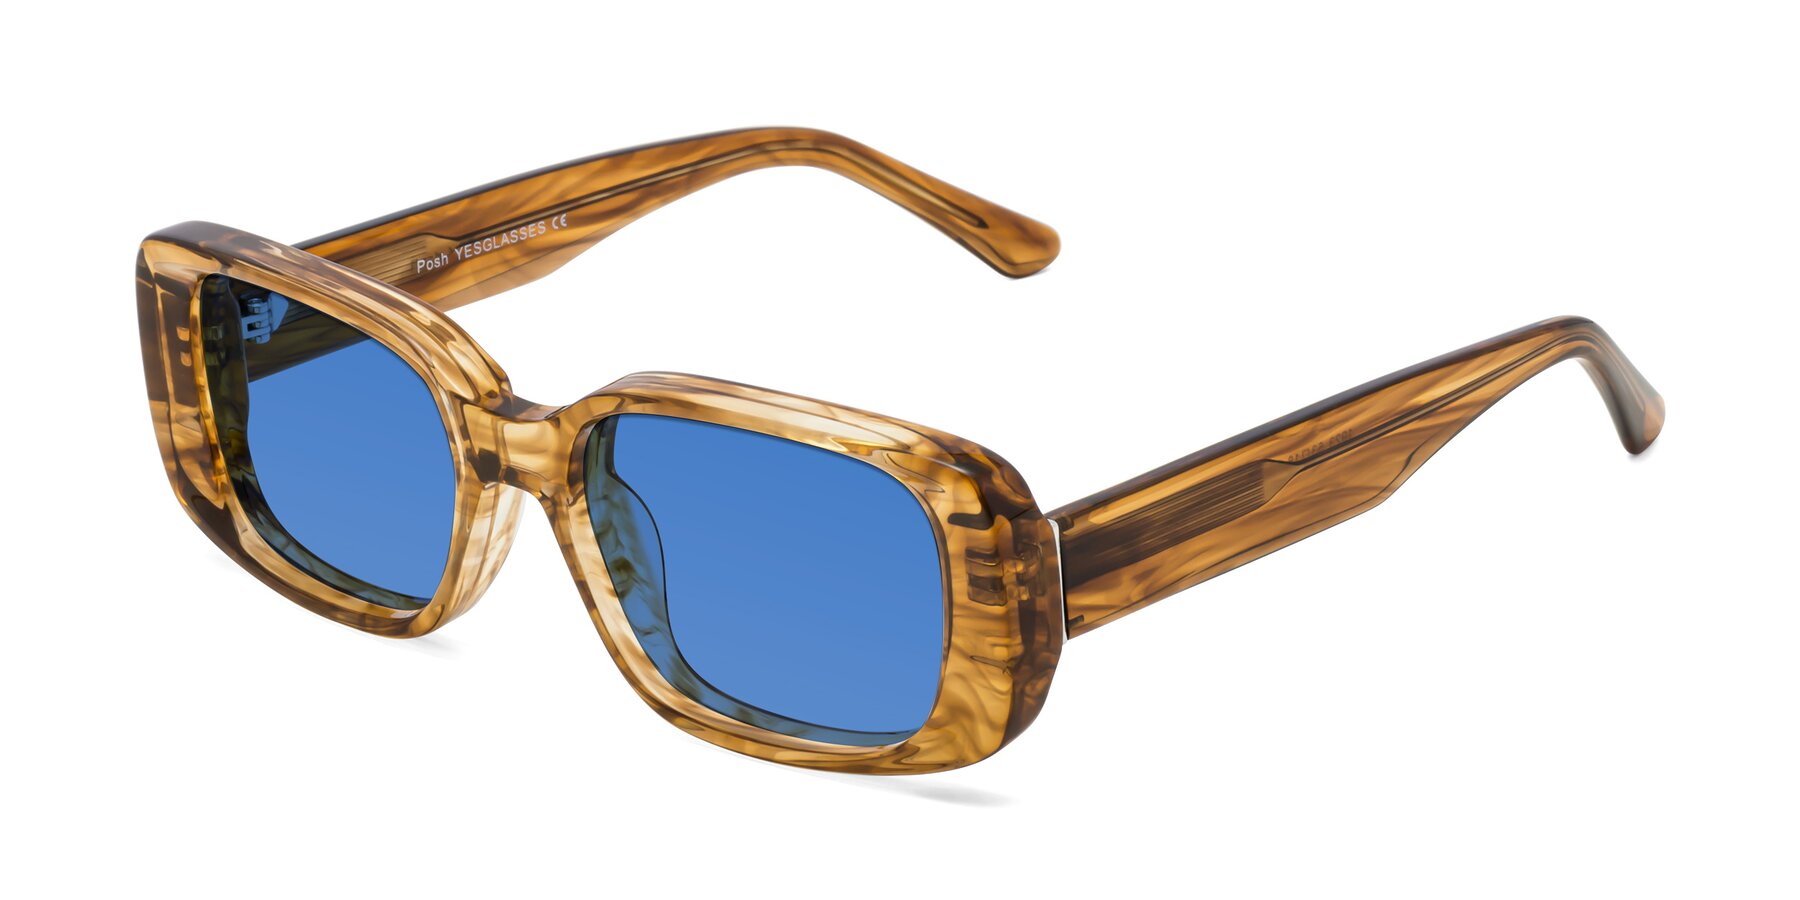 Angle of Posh in Stripe Amber with Blue Tinted Lenses